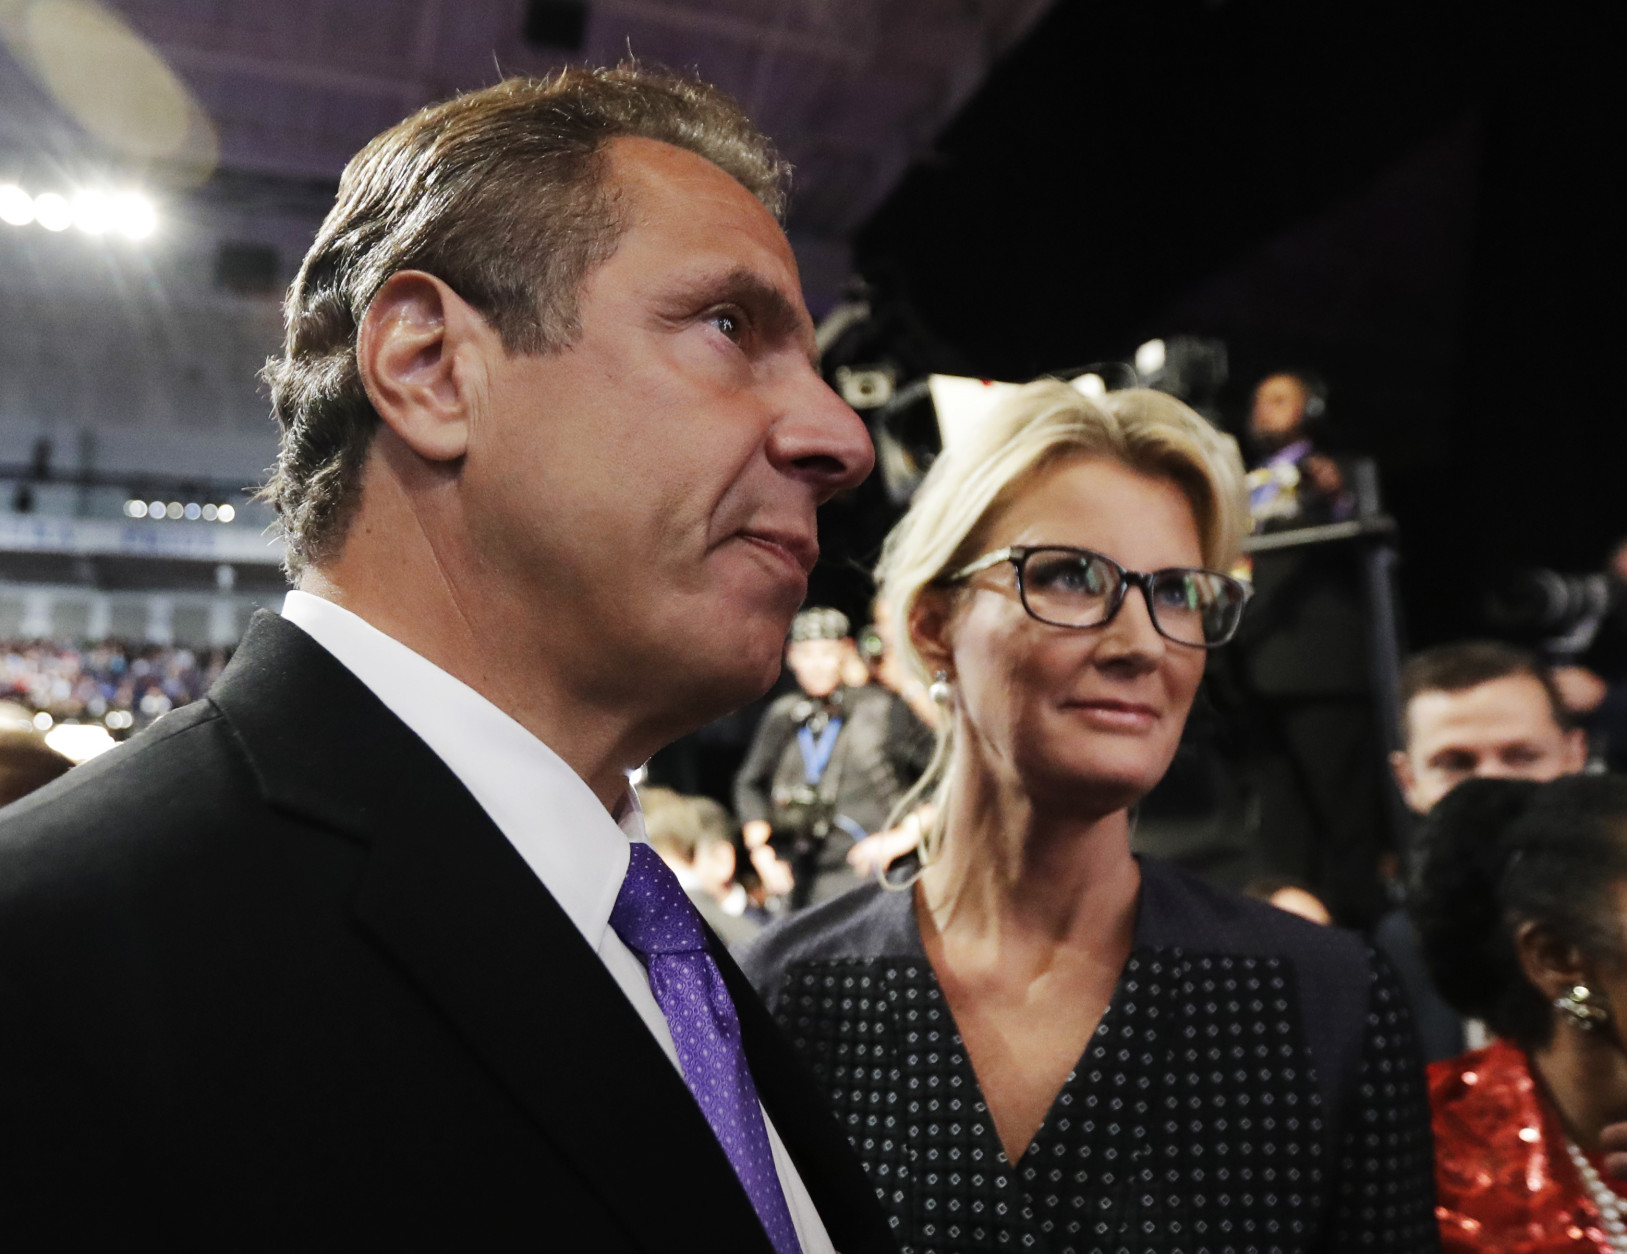 New York Governor Andrew Cuomo arrives with his wife Sandra Lee for the presidential debate between Democratic presidential nominee Hillary Clinton and Republican presidential nominee Donald Trump at Hofstra University in Hempstead, N.Y., Monday, Sept. 26, 2016. (AP Photo/Julio Cortez)